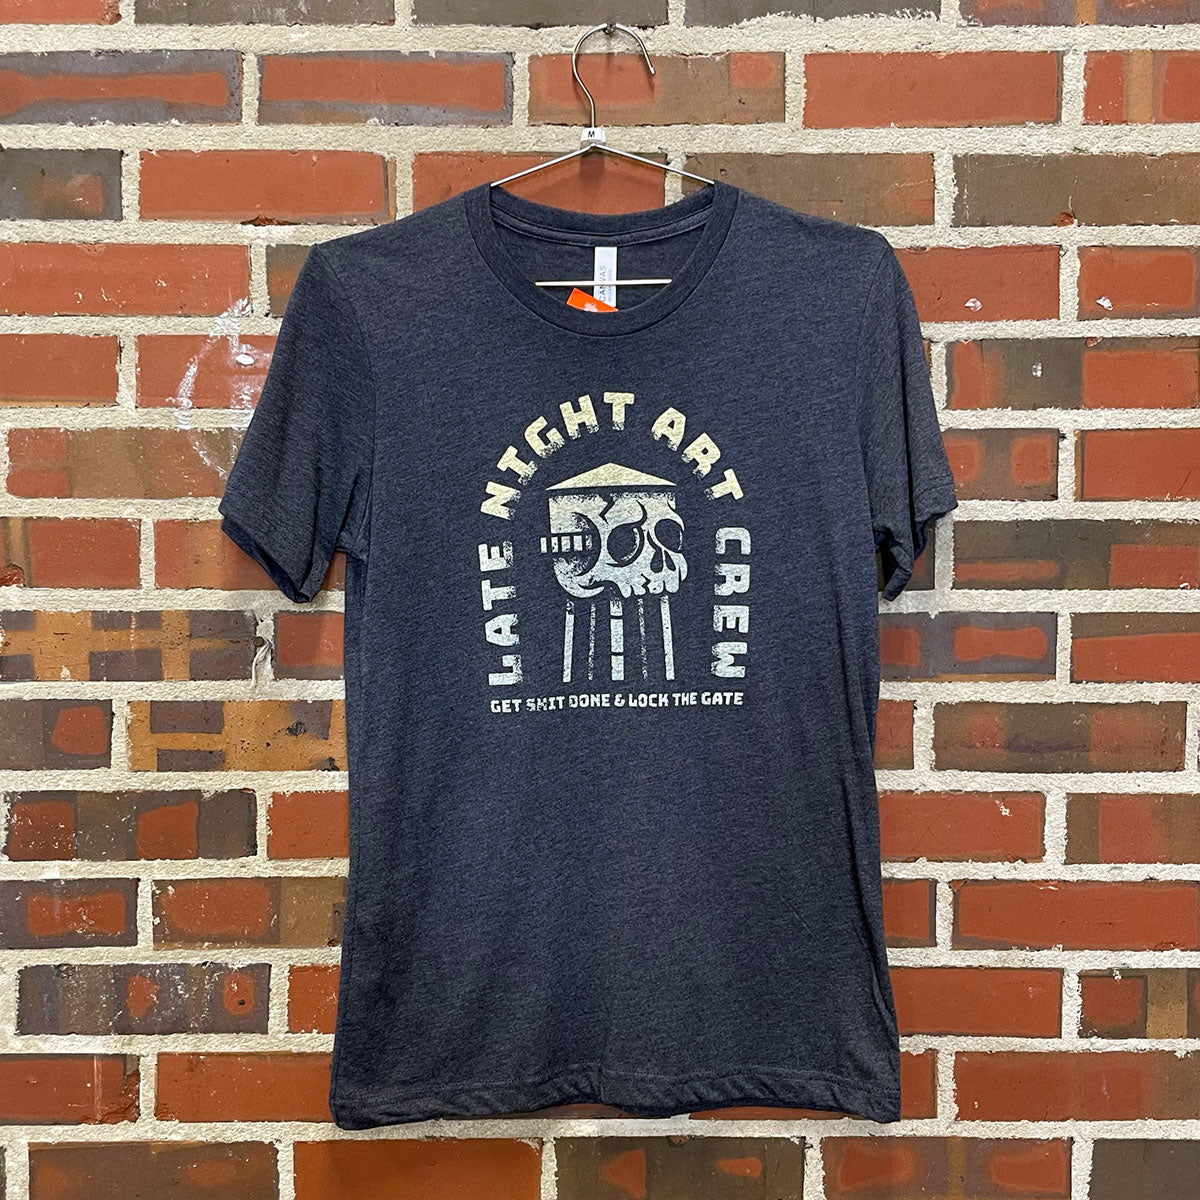 Thumbnail of text "late night art crew" with a skull shaped watertower on a dark blue shirt against a red brick wall